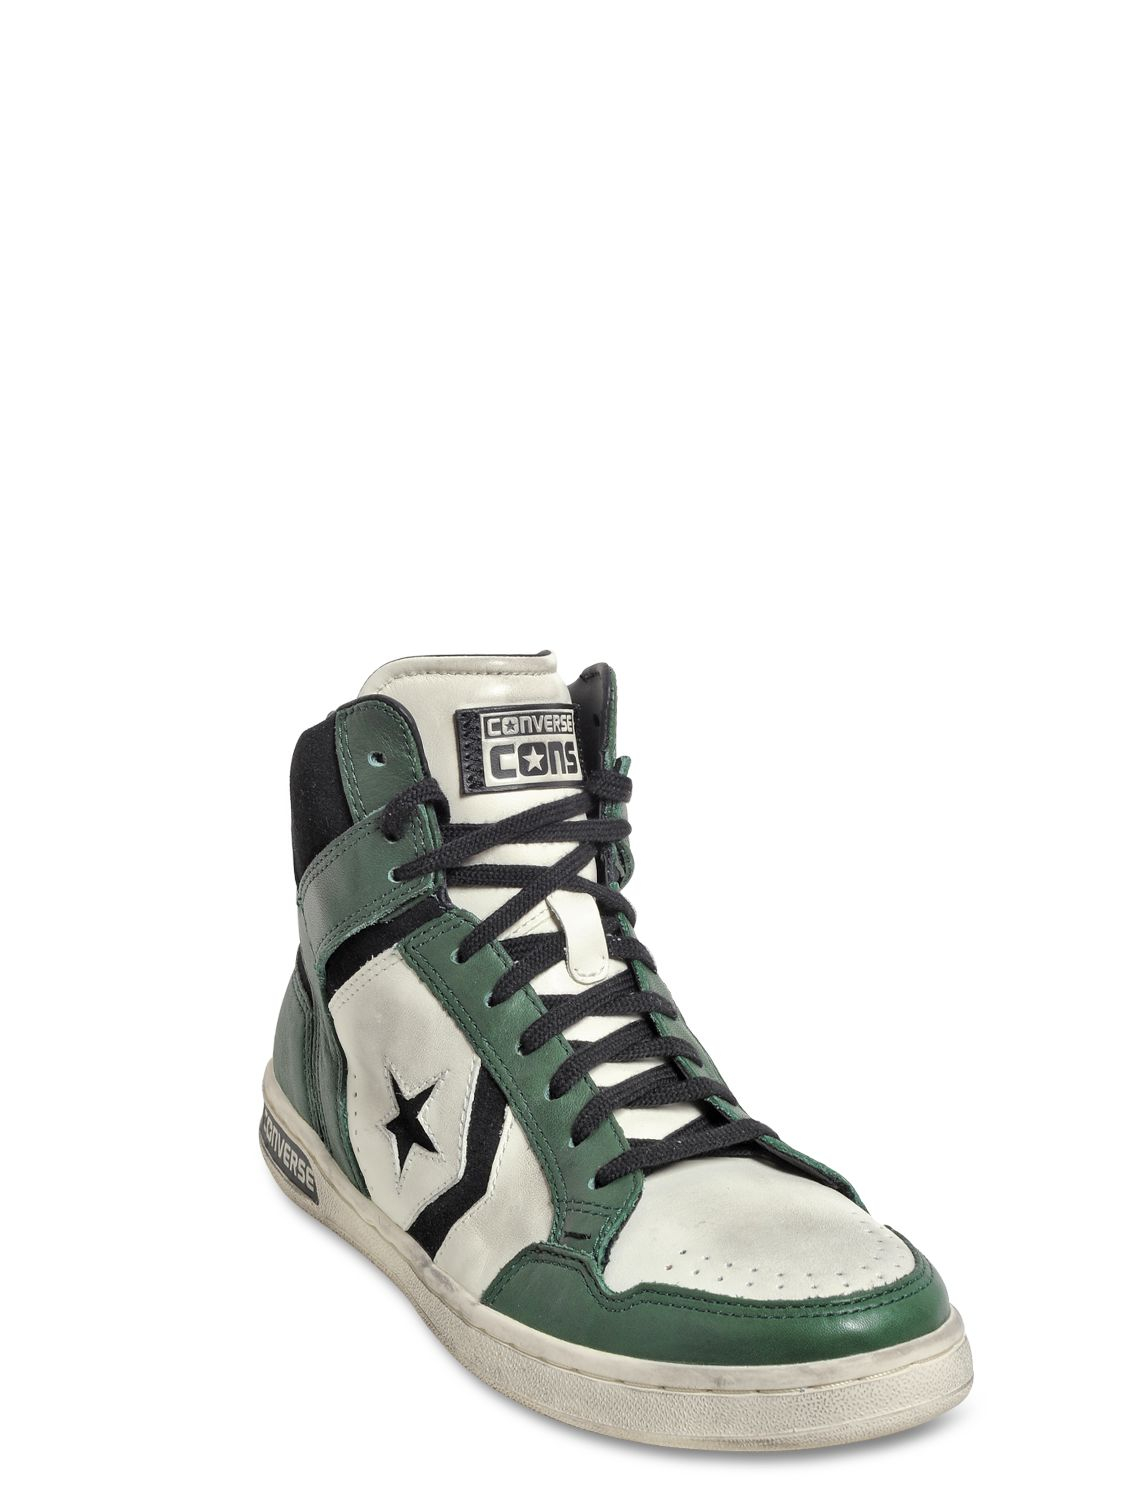 Converse Weapon Leather High Top Sneakers in White/Green (Green ... باب شبك حديد